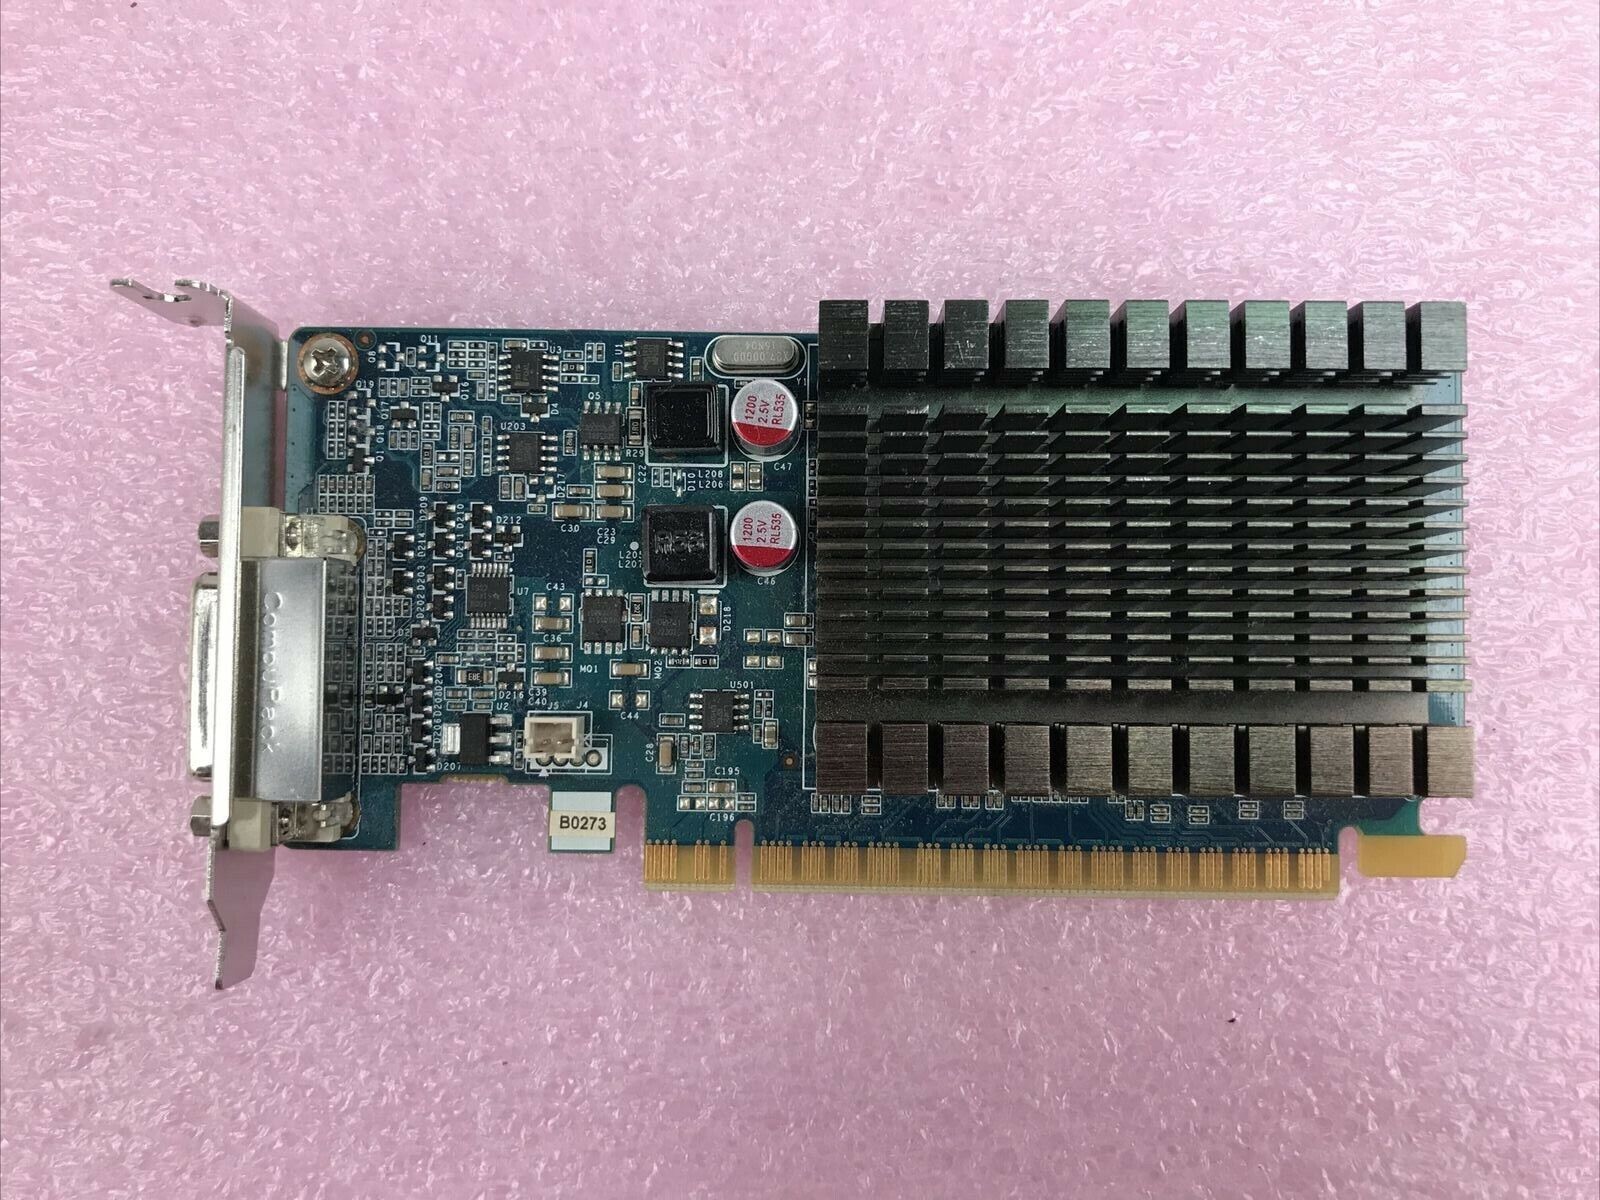 PNY GeForce 8400 GS 1GB DDR3 PCI-E 2.0 Video Card DMS-59 LOW Profile